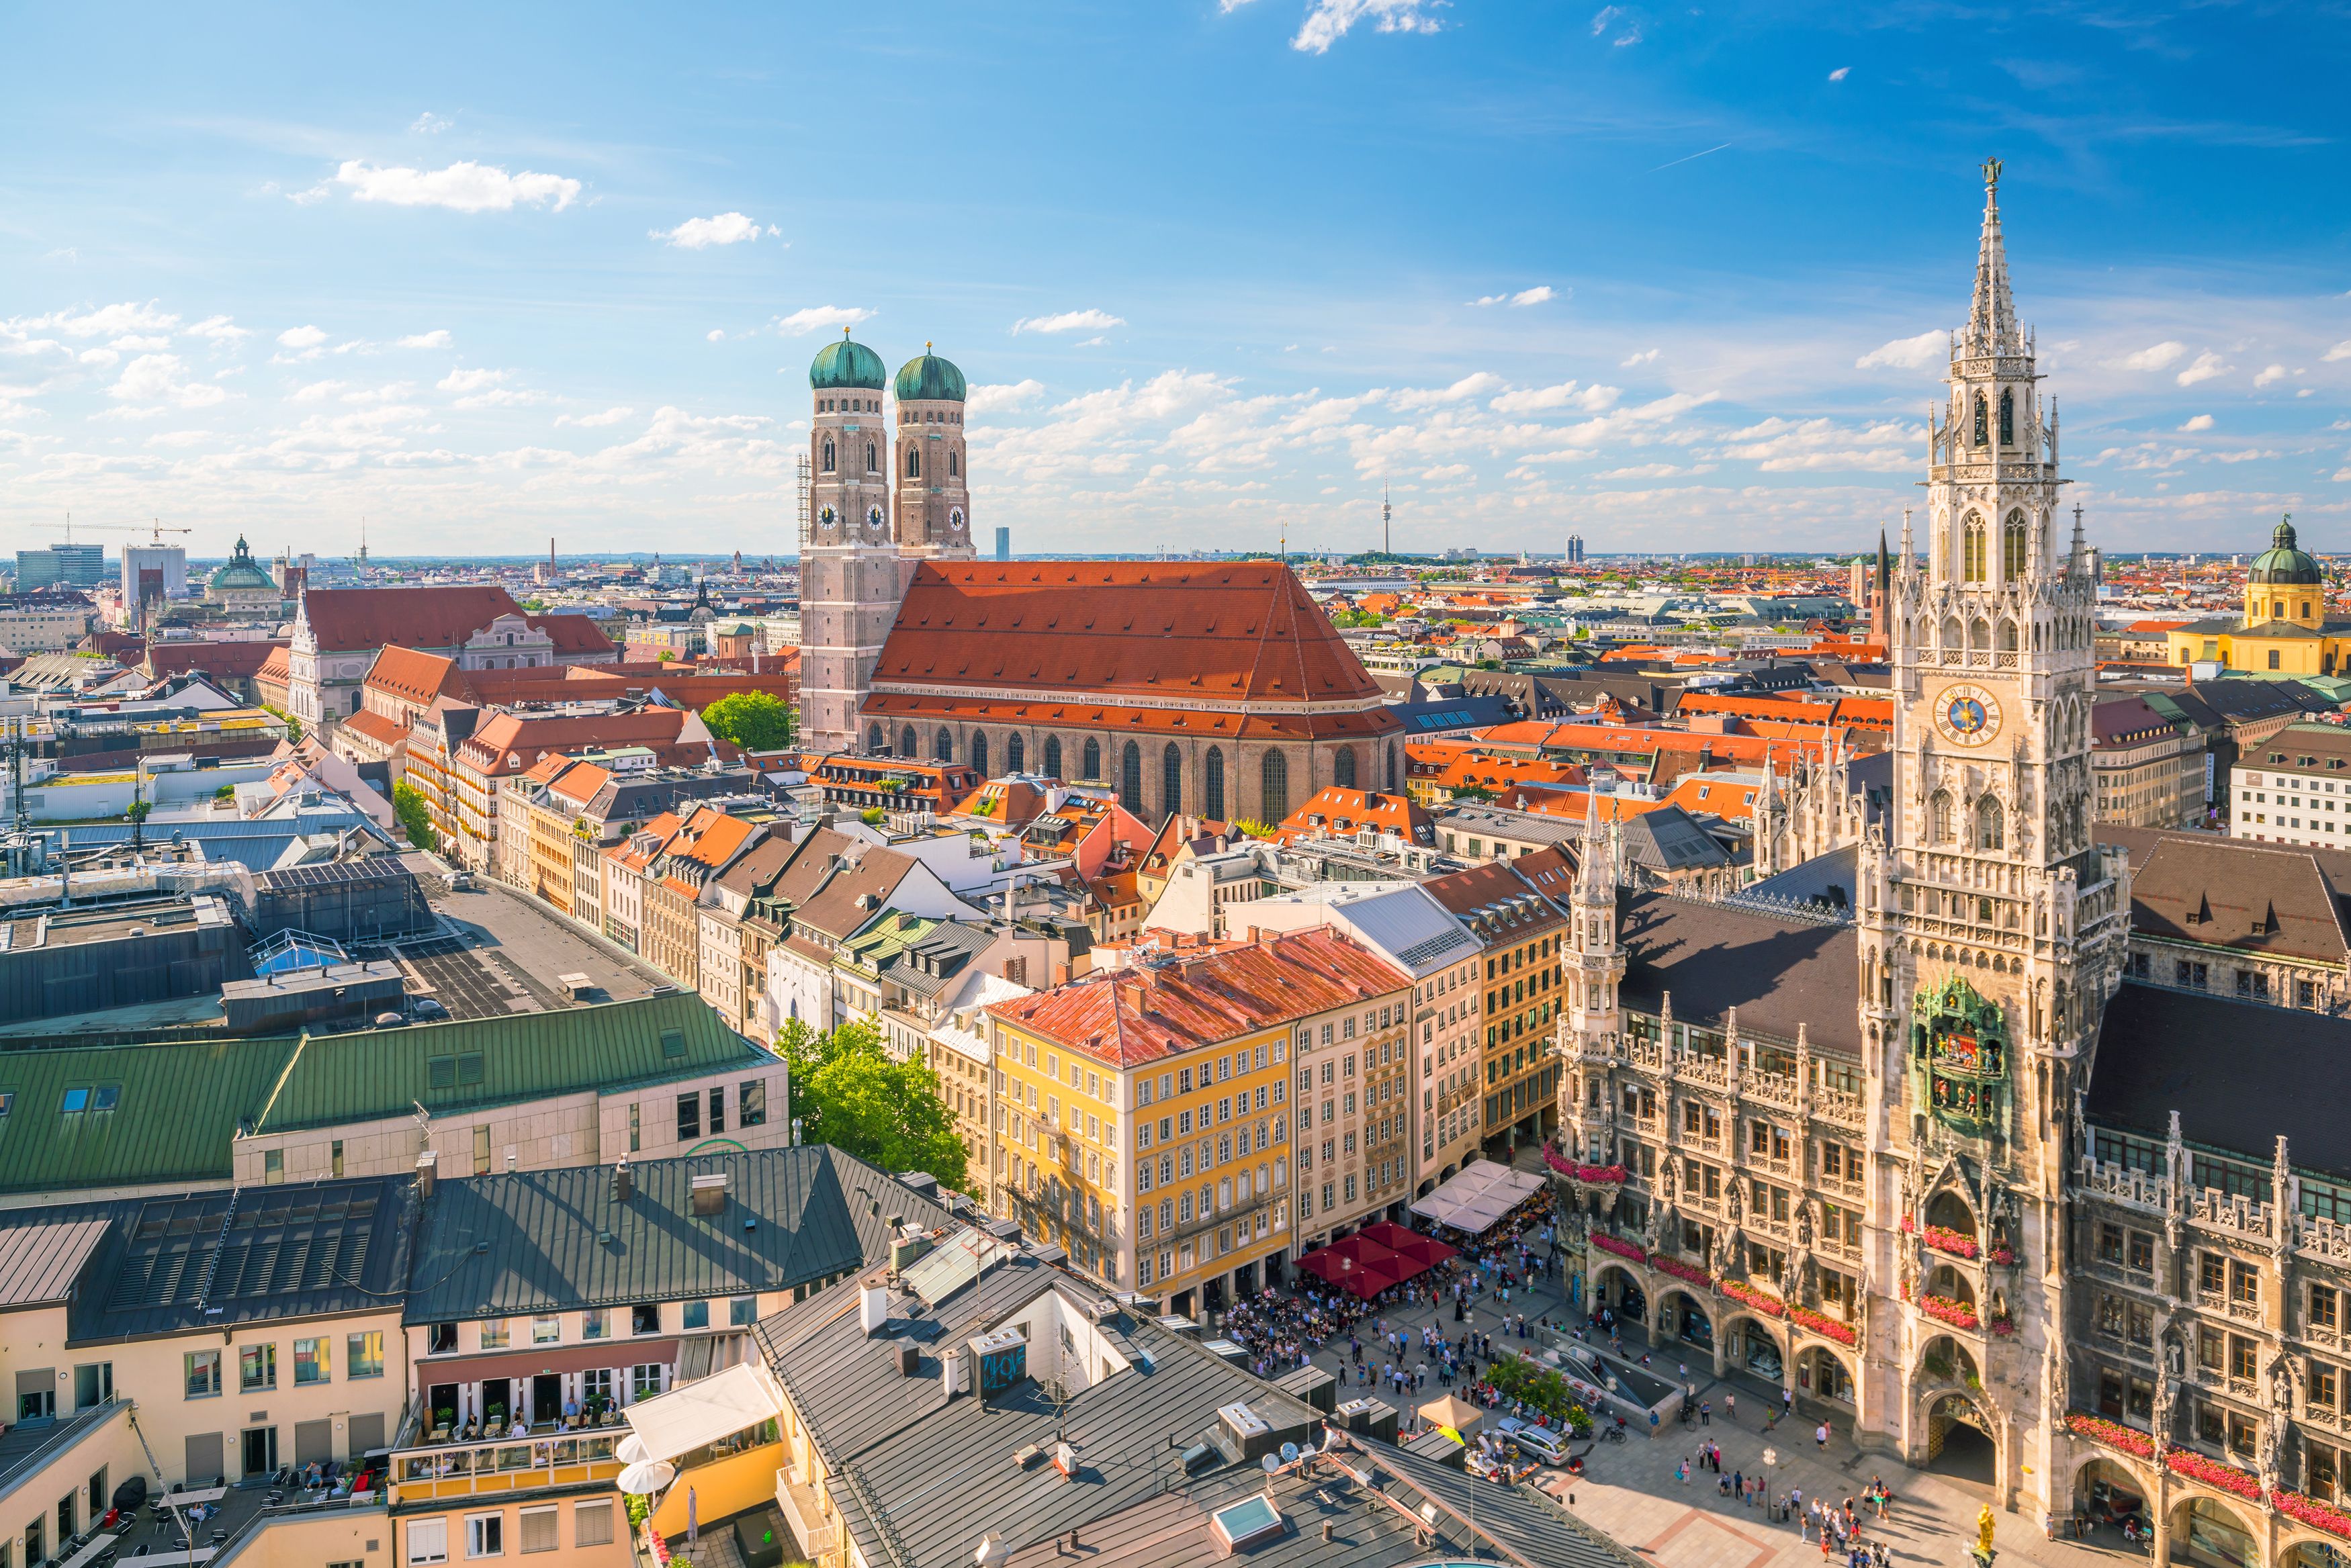 Munich is one of the few landlocked cities where you'll come across surfers, board and wetsuit included. When you go running in Munich, you will discover their favourite spot, but also the impressive Nymphenburg castle and the futuristic BMW headquarters.